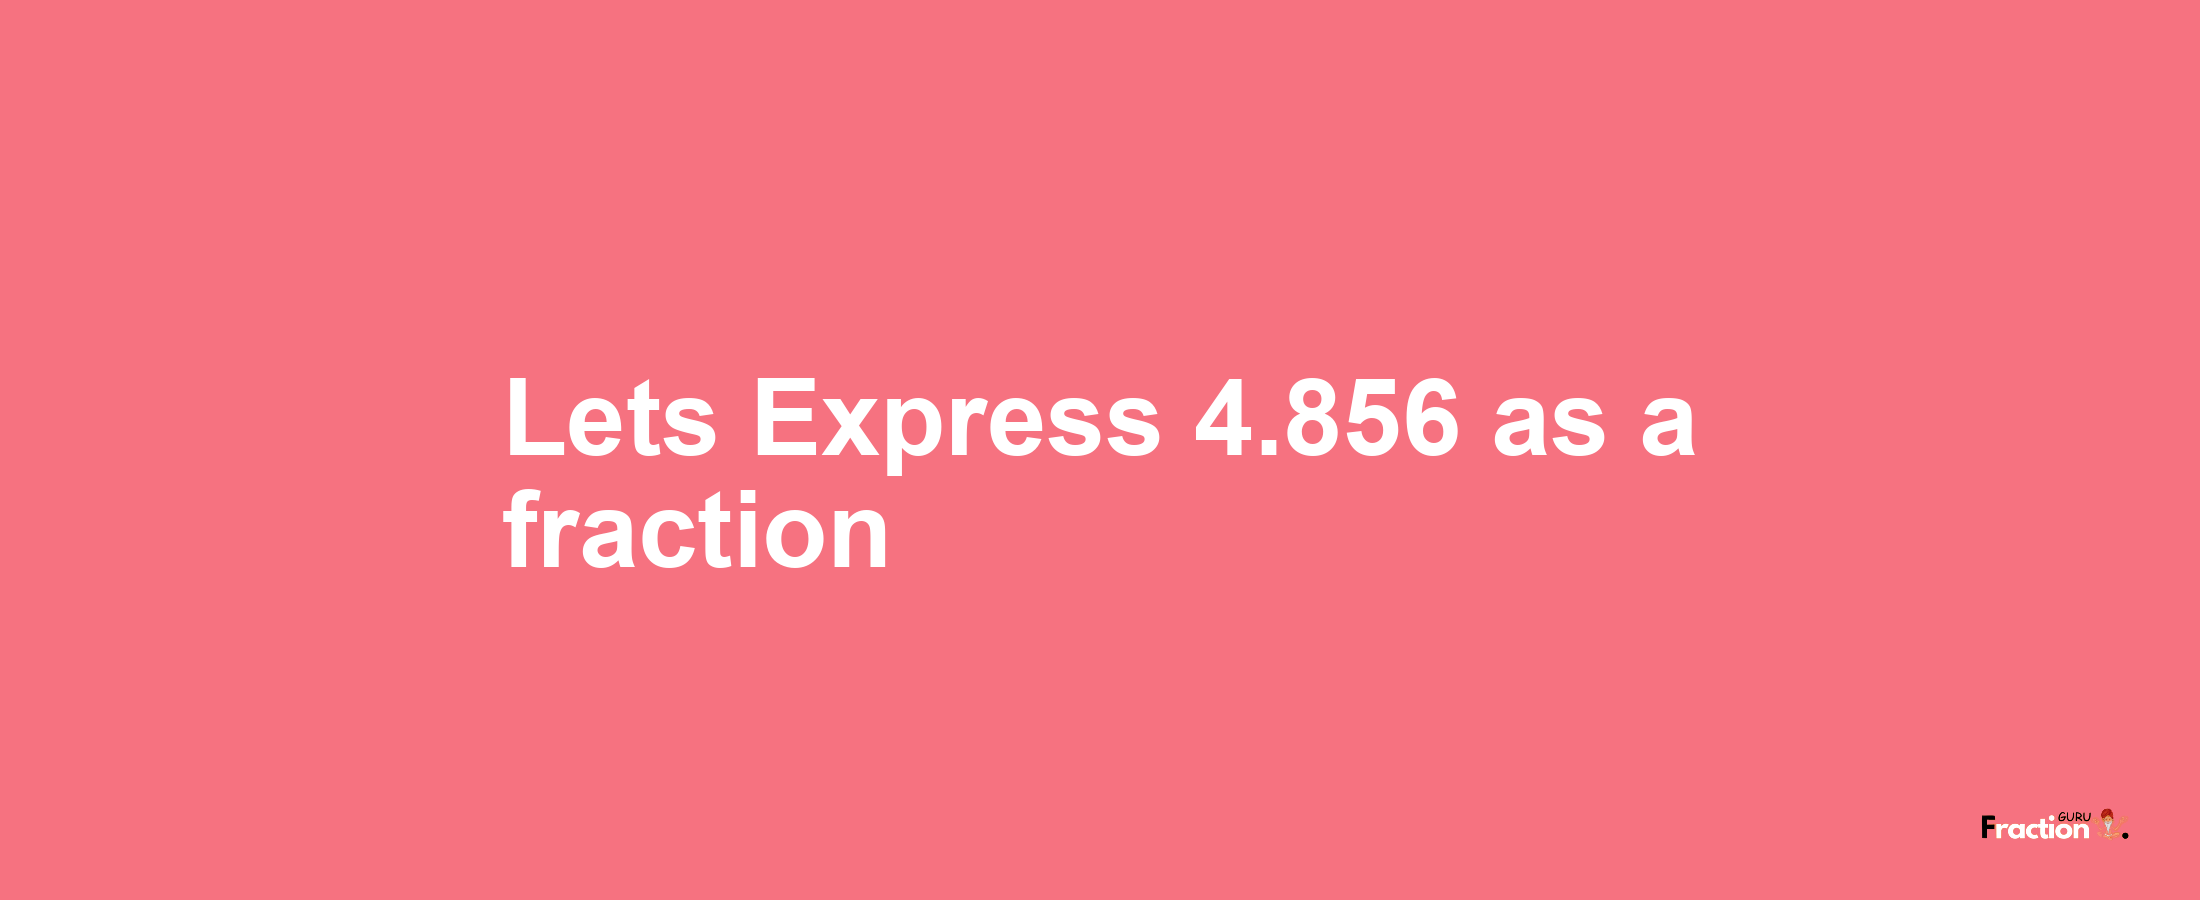 Lets Express 4.856 as afraction